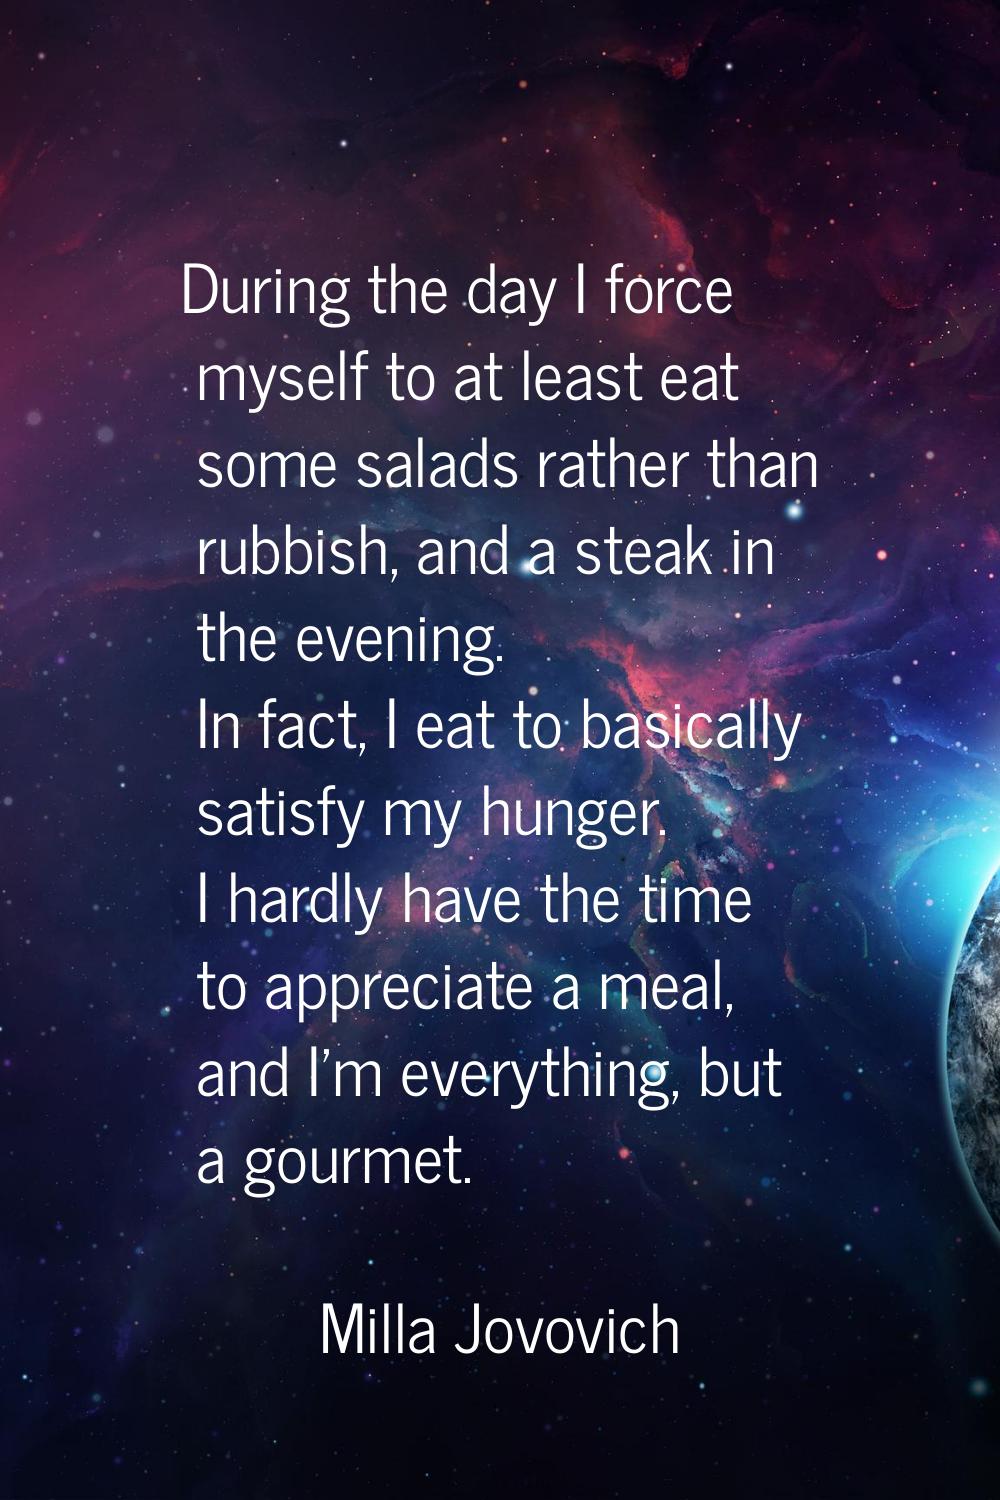 During the day I force myself to at least eat some salads rather than rubbish, and a steak in the e